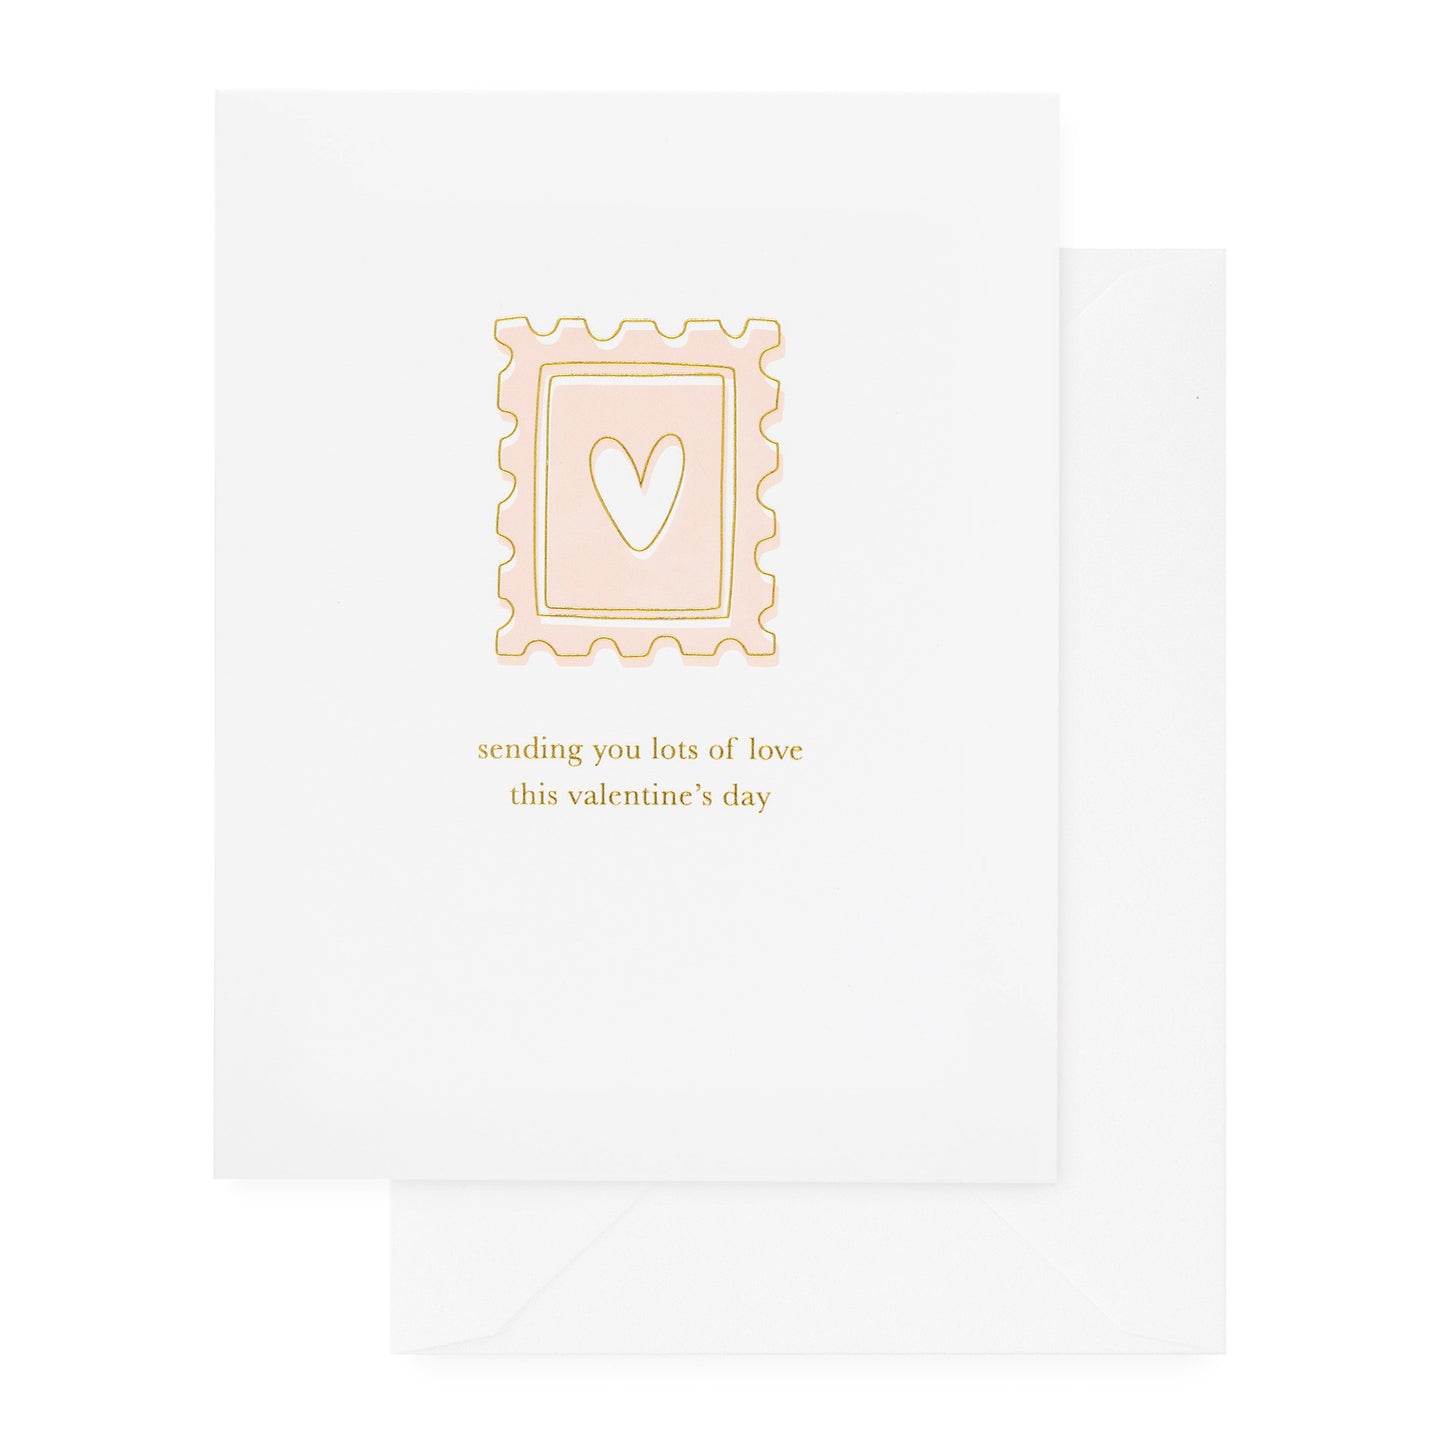 white card with pink and gold stamp and text, white envelope